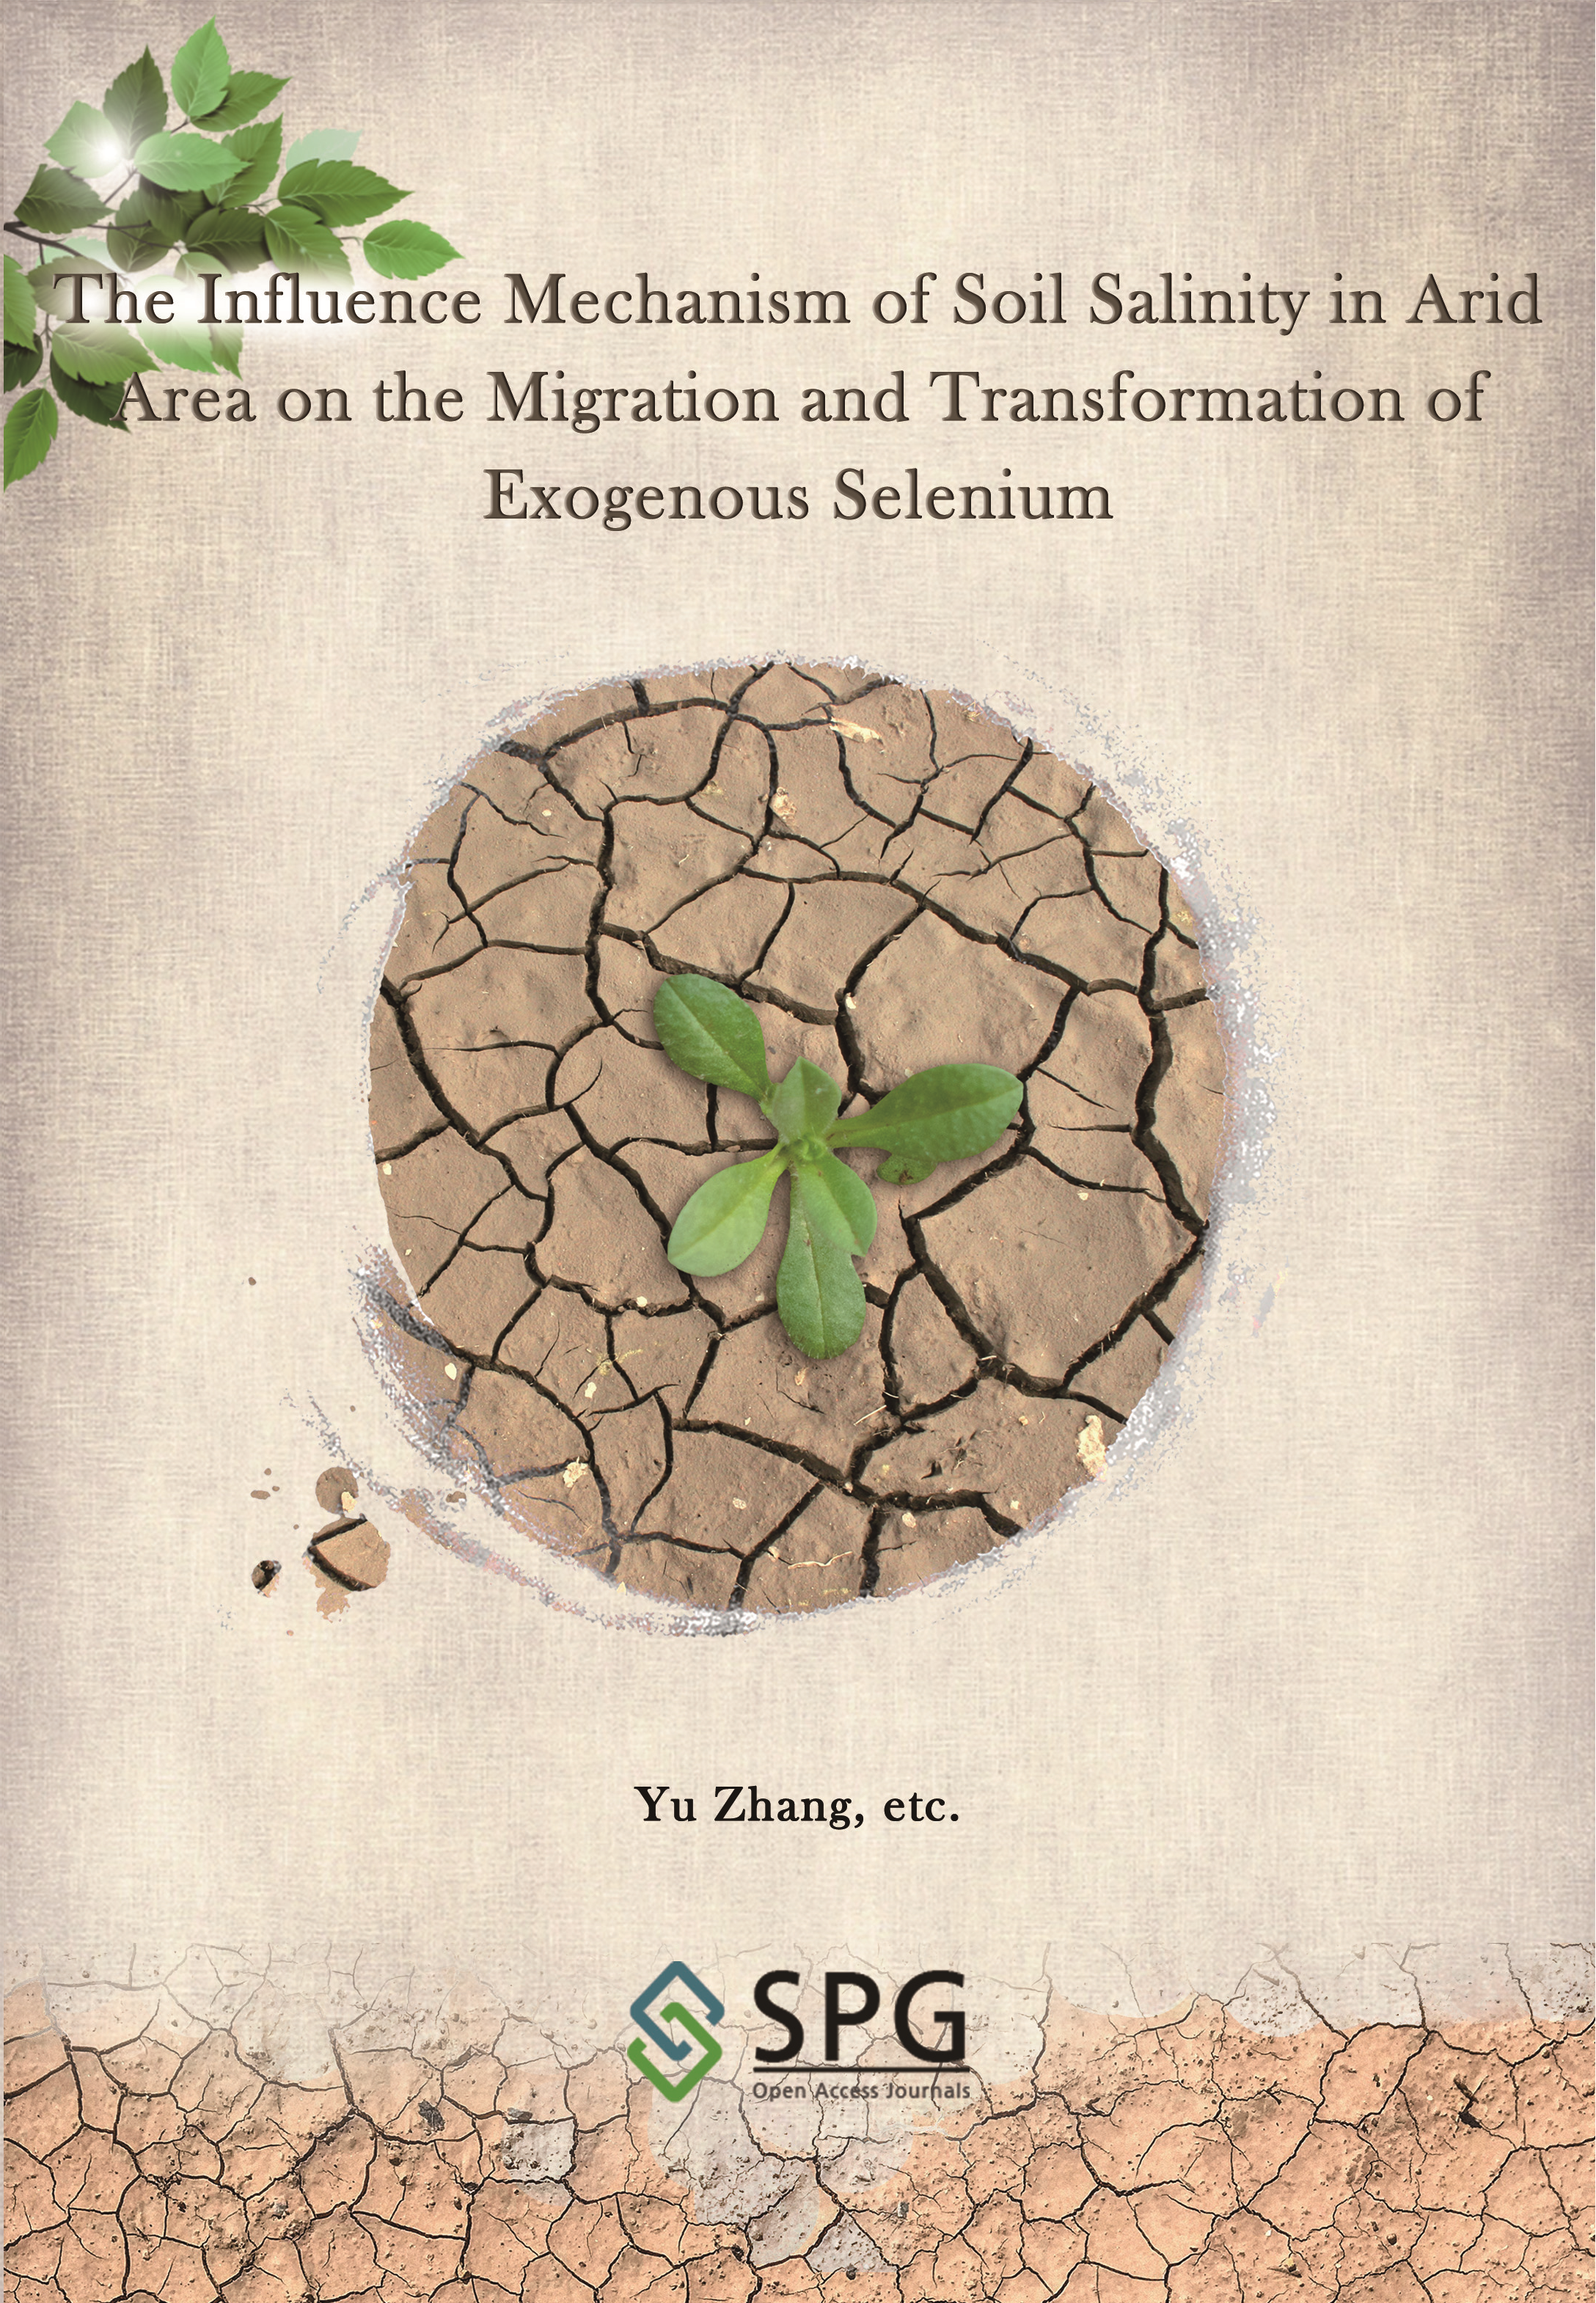 The Influence Mechanism of Soil Salinity in Arid Area on the Migration and Transformation of Exogenous Selenium | Scholar Publishing Group